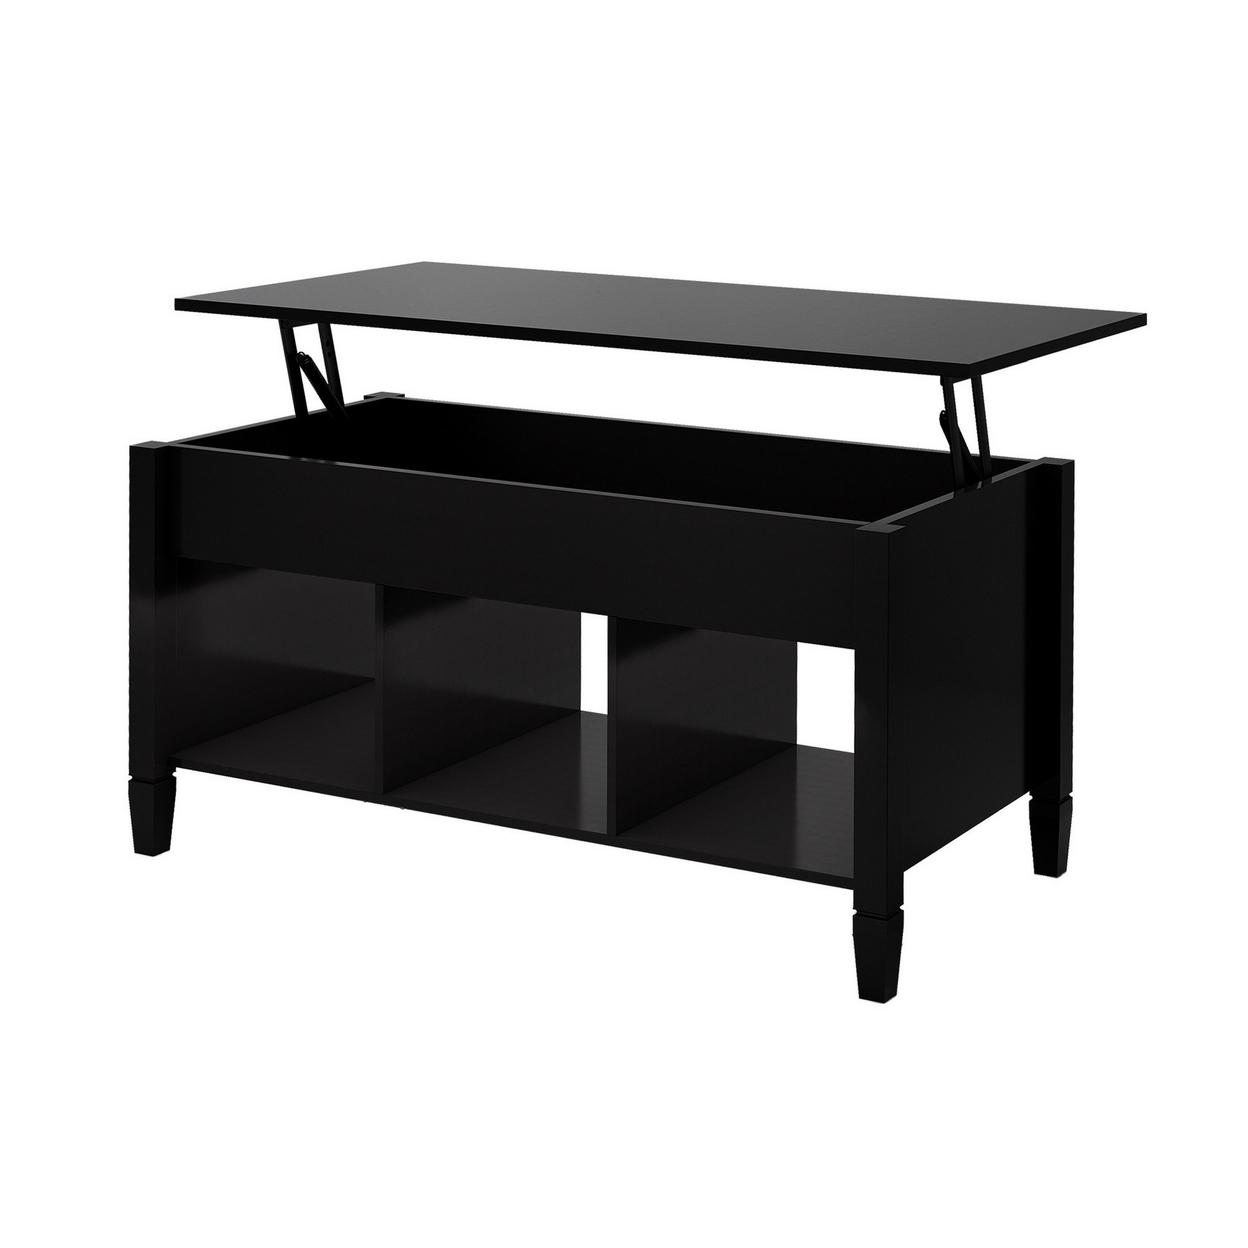 41 Inch Lift Top Coffee Table With 3 Hidden Storage Compartments, Black- Saltoro Sherpi